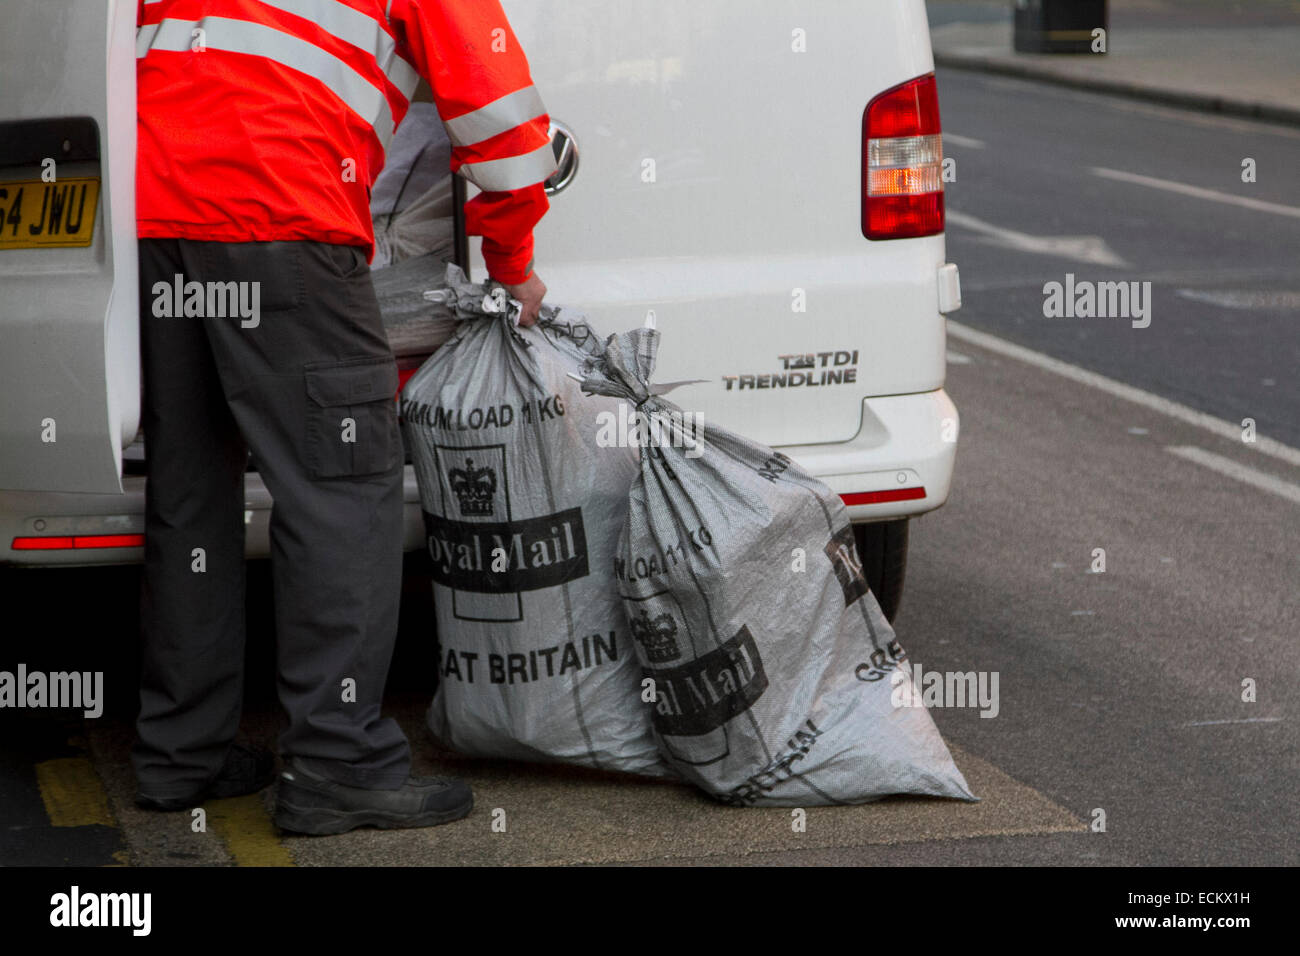 Wimbledon, London, UK. 16th Dec, 2014. A Royal Mail worker carries Christmas post in bags out of a Post Office branch at Wimbledon. Longer queues at the Post Office as people try to get the Christmas post deadline. The longer queues is parlty caused by the closure of thousands of Post Office branches across the United Kingdom Credit:  amer ghazzal/Alamy Live News Stock Photo